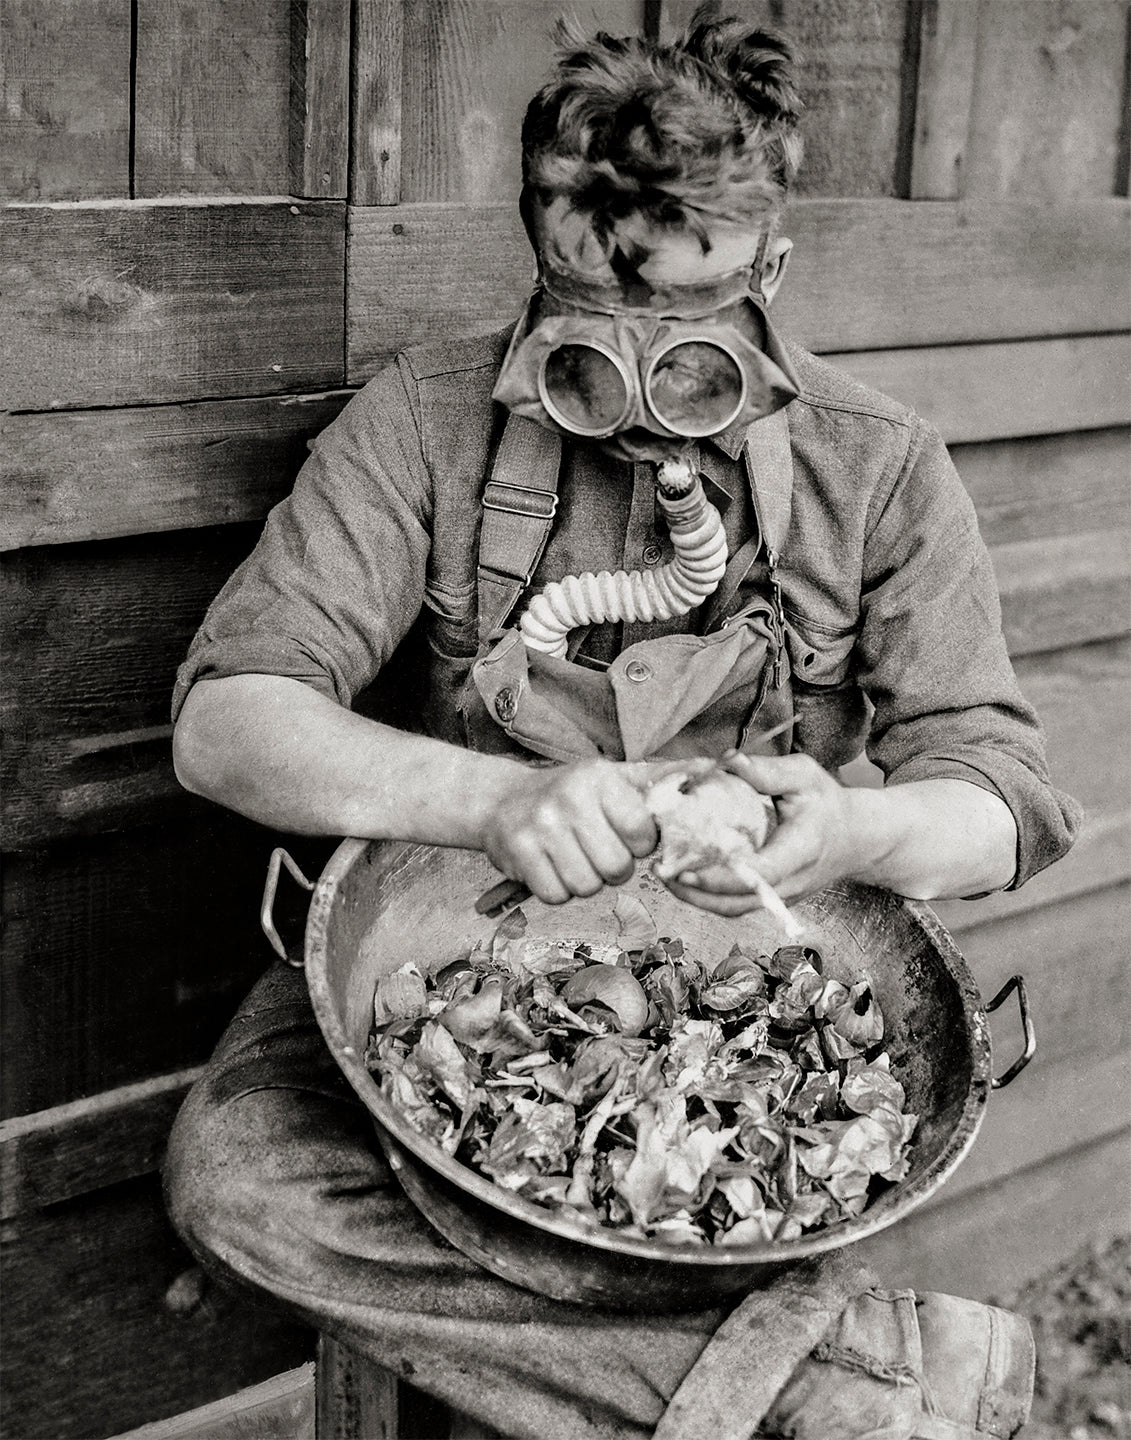 Clever soldier uses Gas Mask To Peel Onions, 1917 Historical Pix